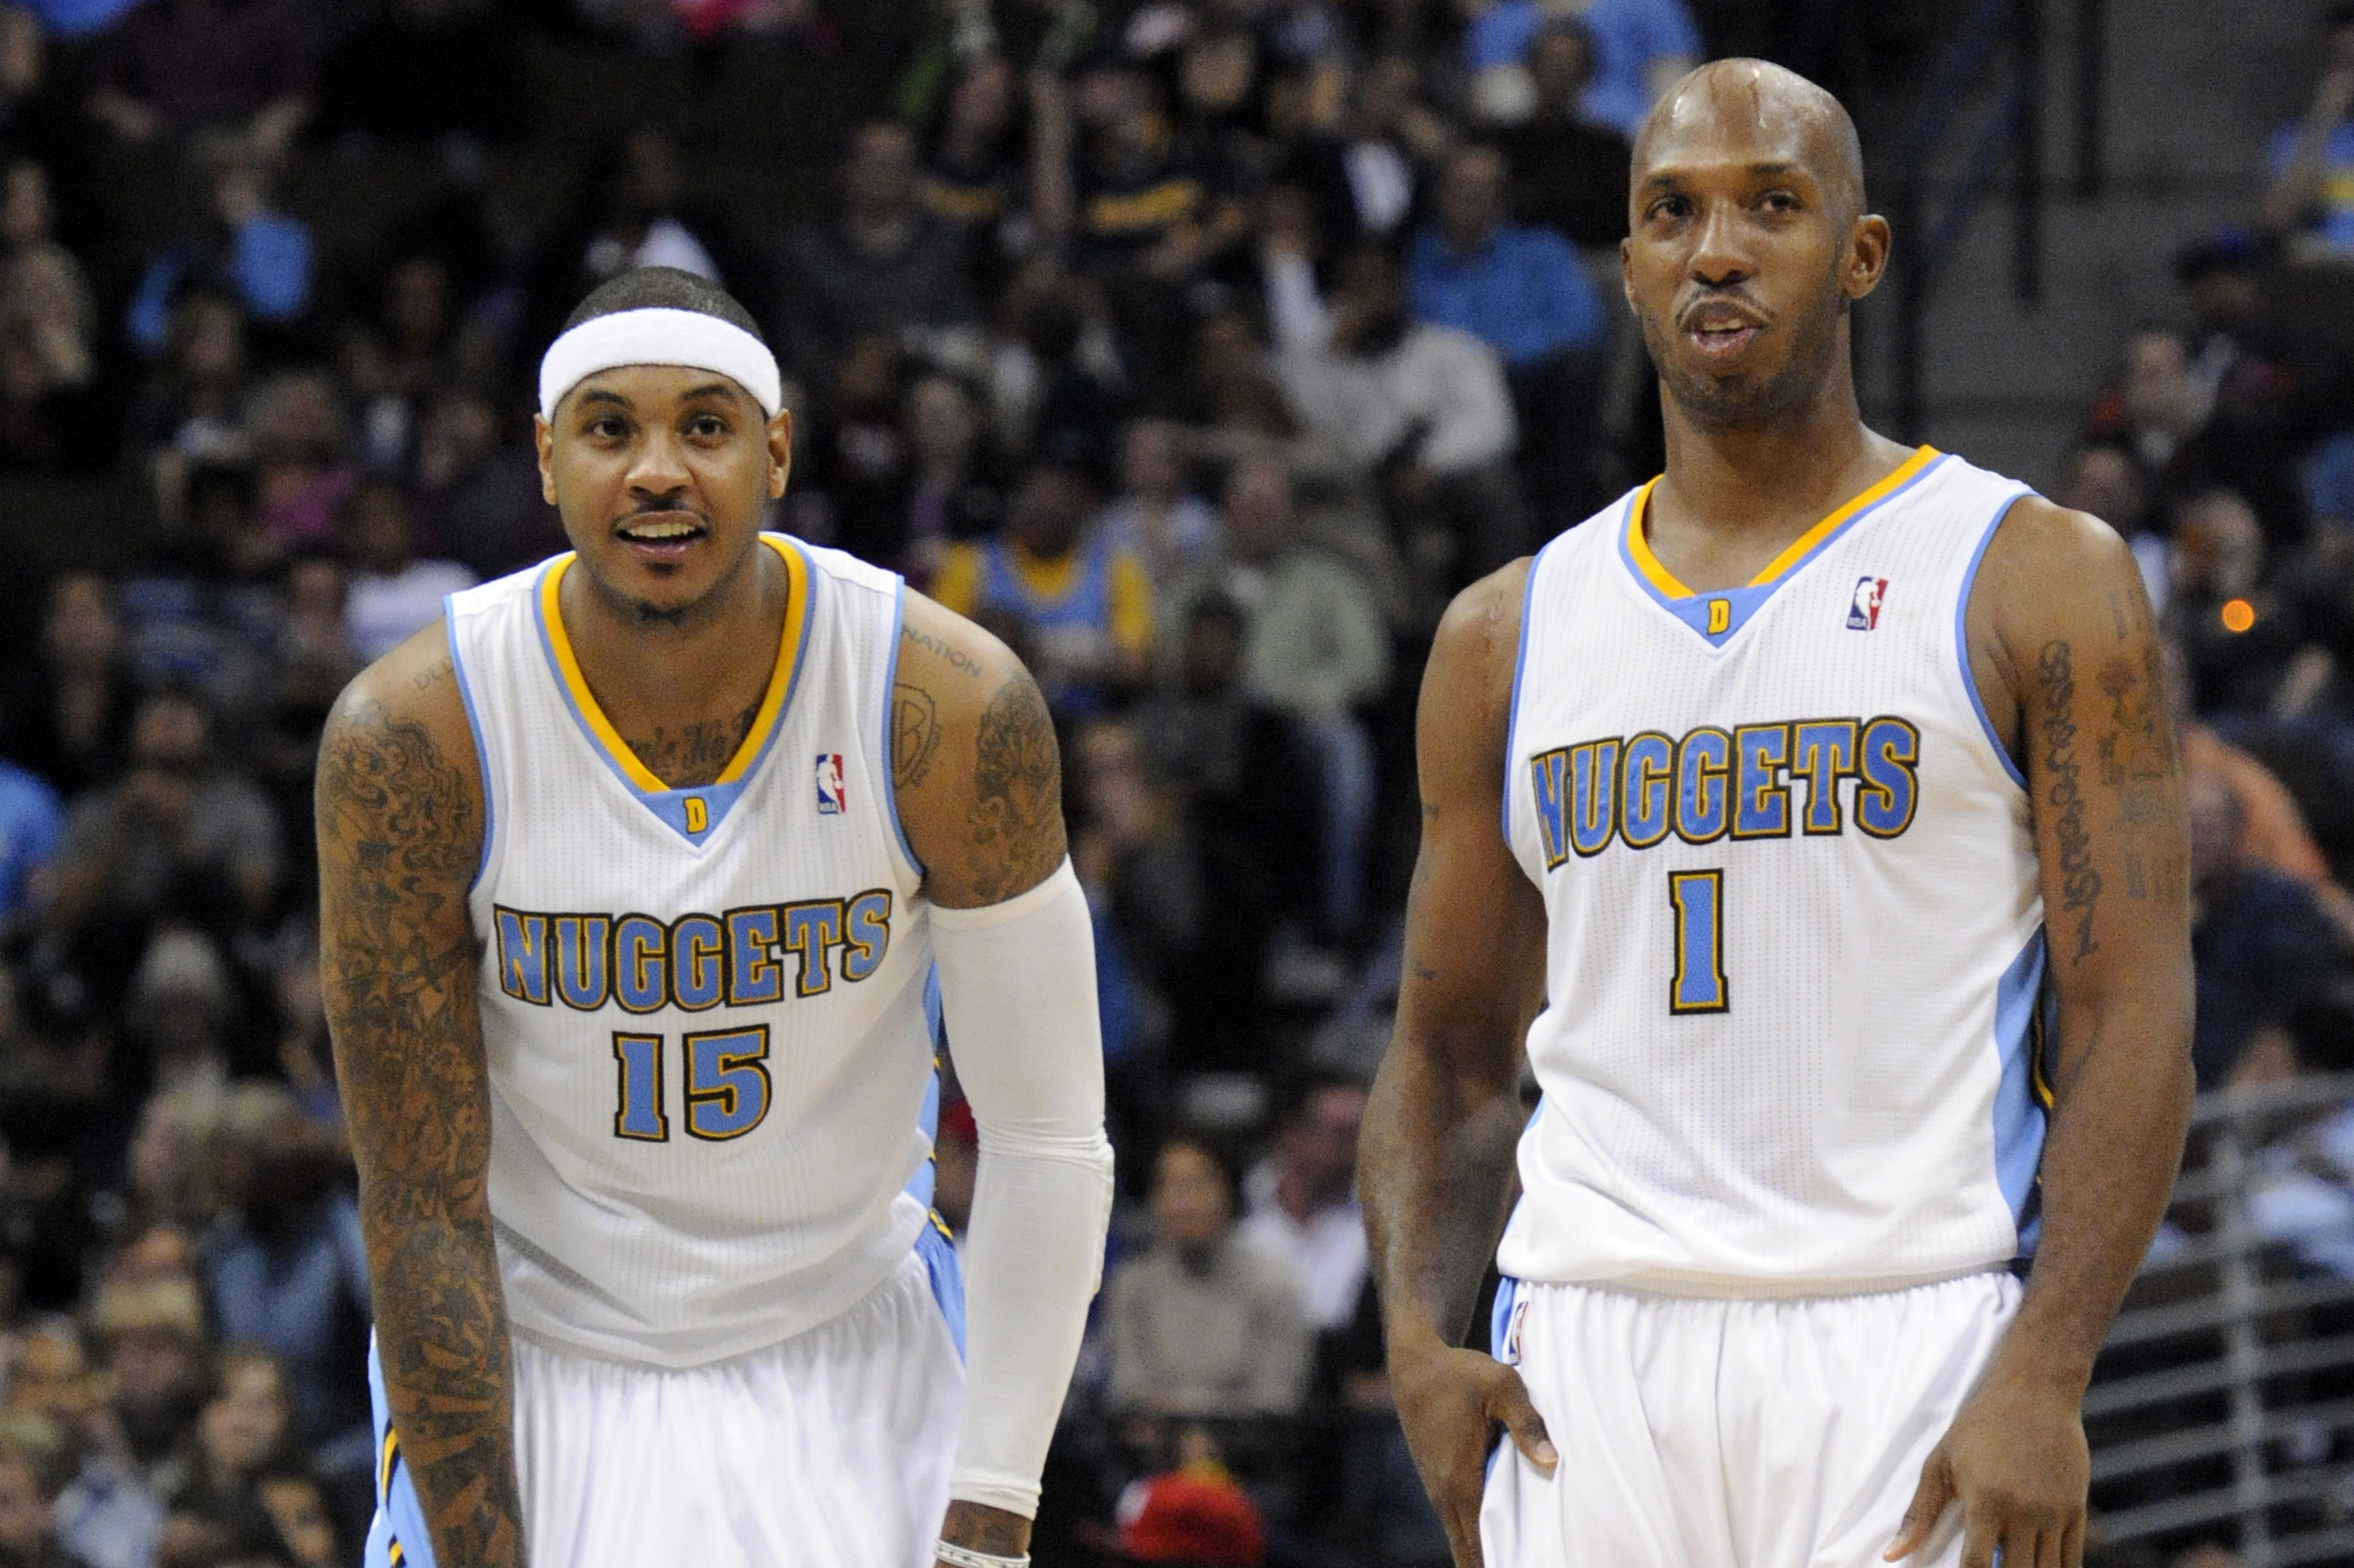 Chauncey Billups: Only Nuggets can keep themselves from repeating